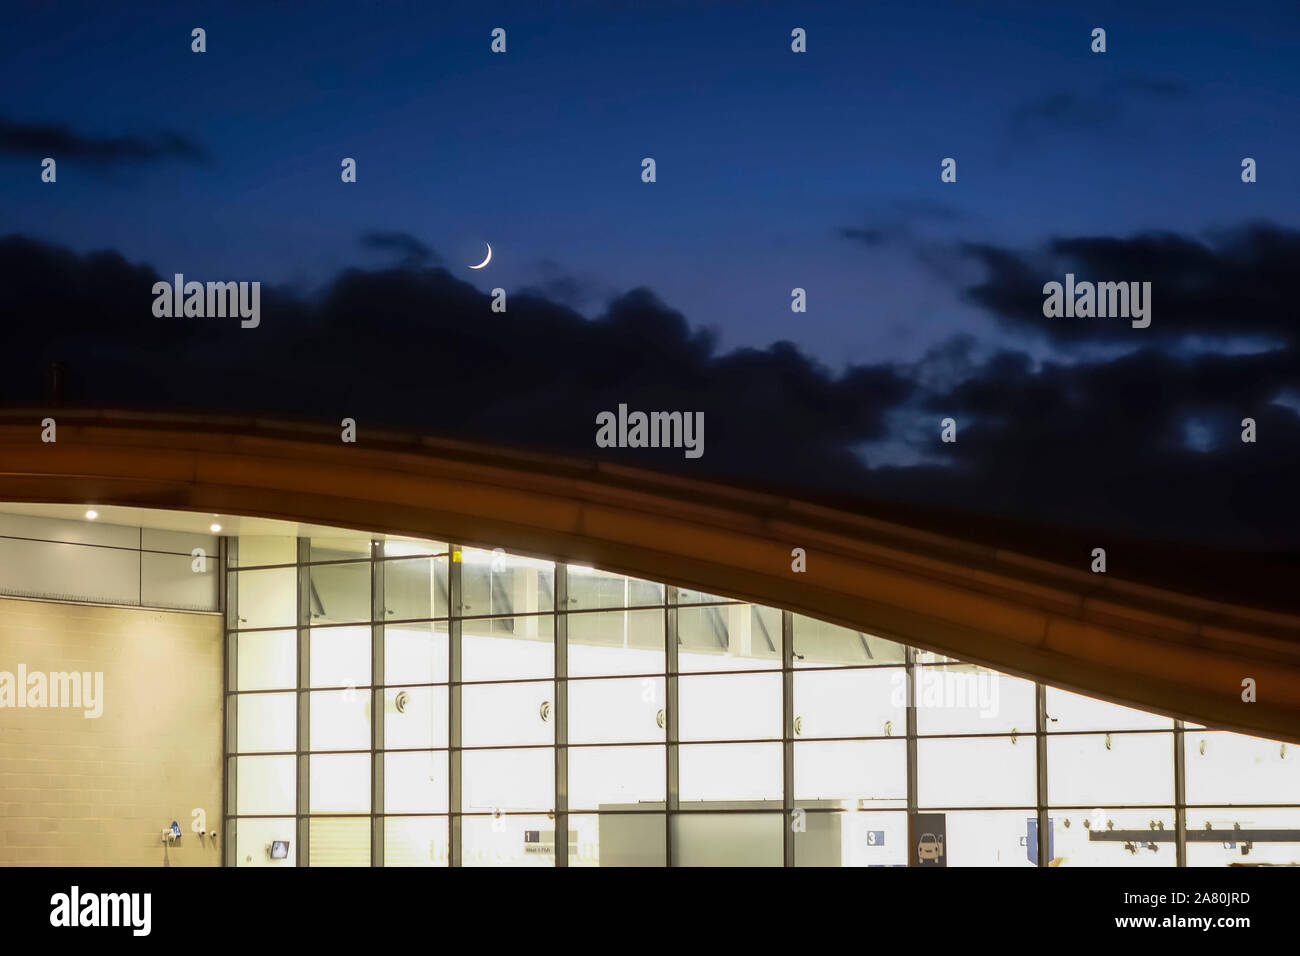 A new moon shining above the curving roof of the Tesco superstore in Ludlow, Shropshire, UK. Designed by MJP Architects in 1997 Stock Photo